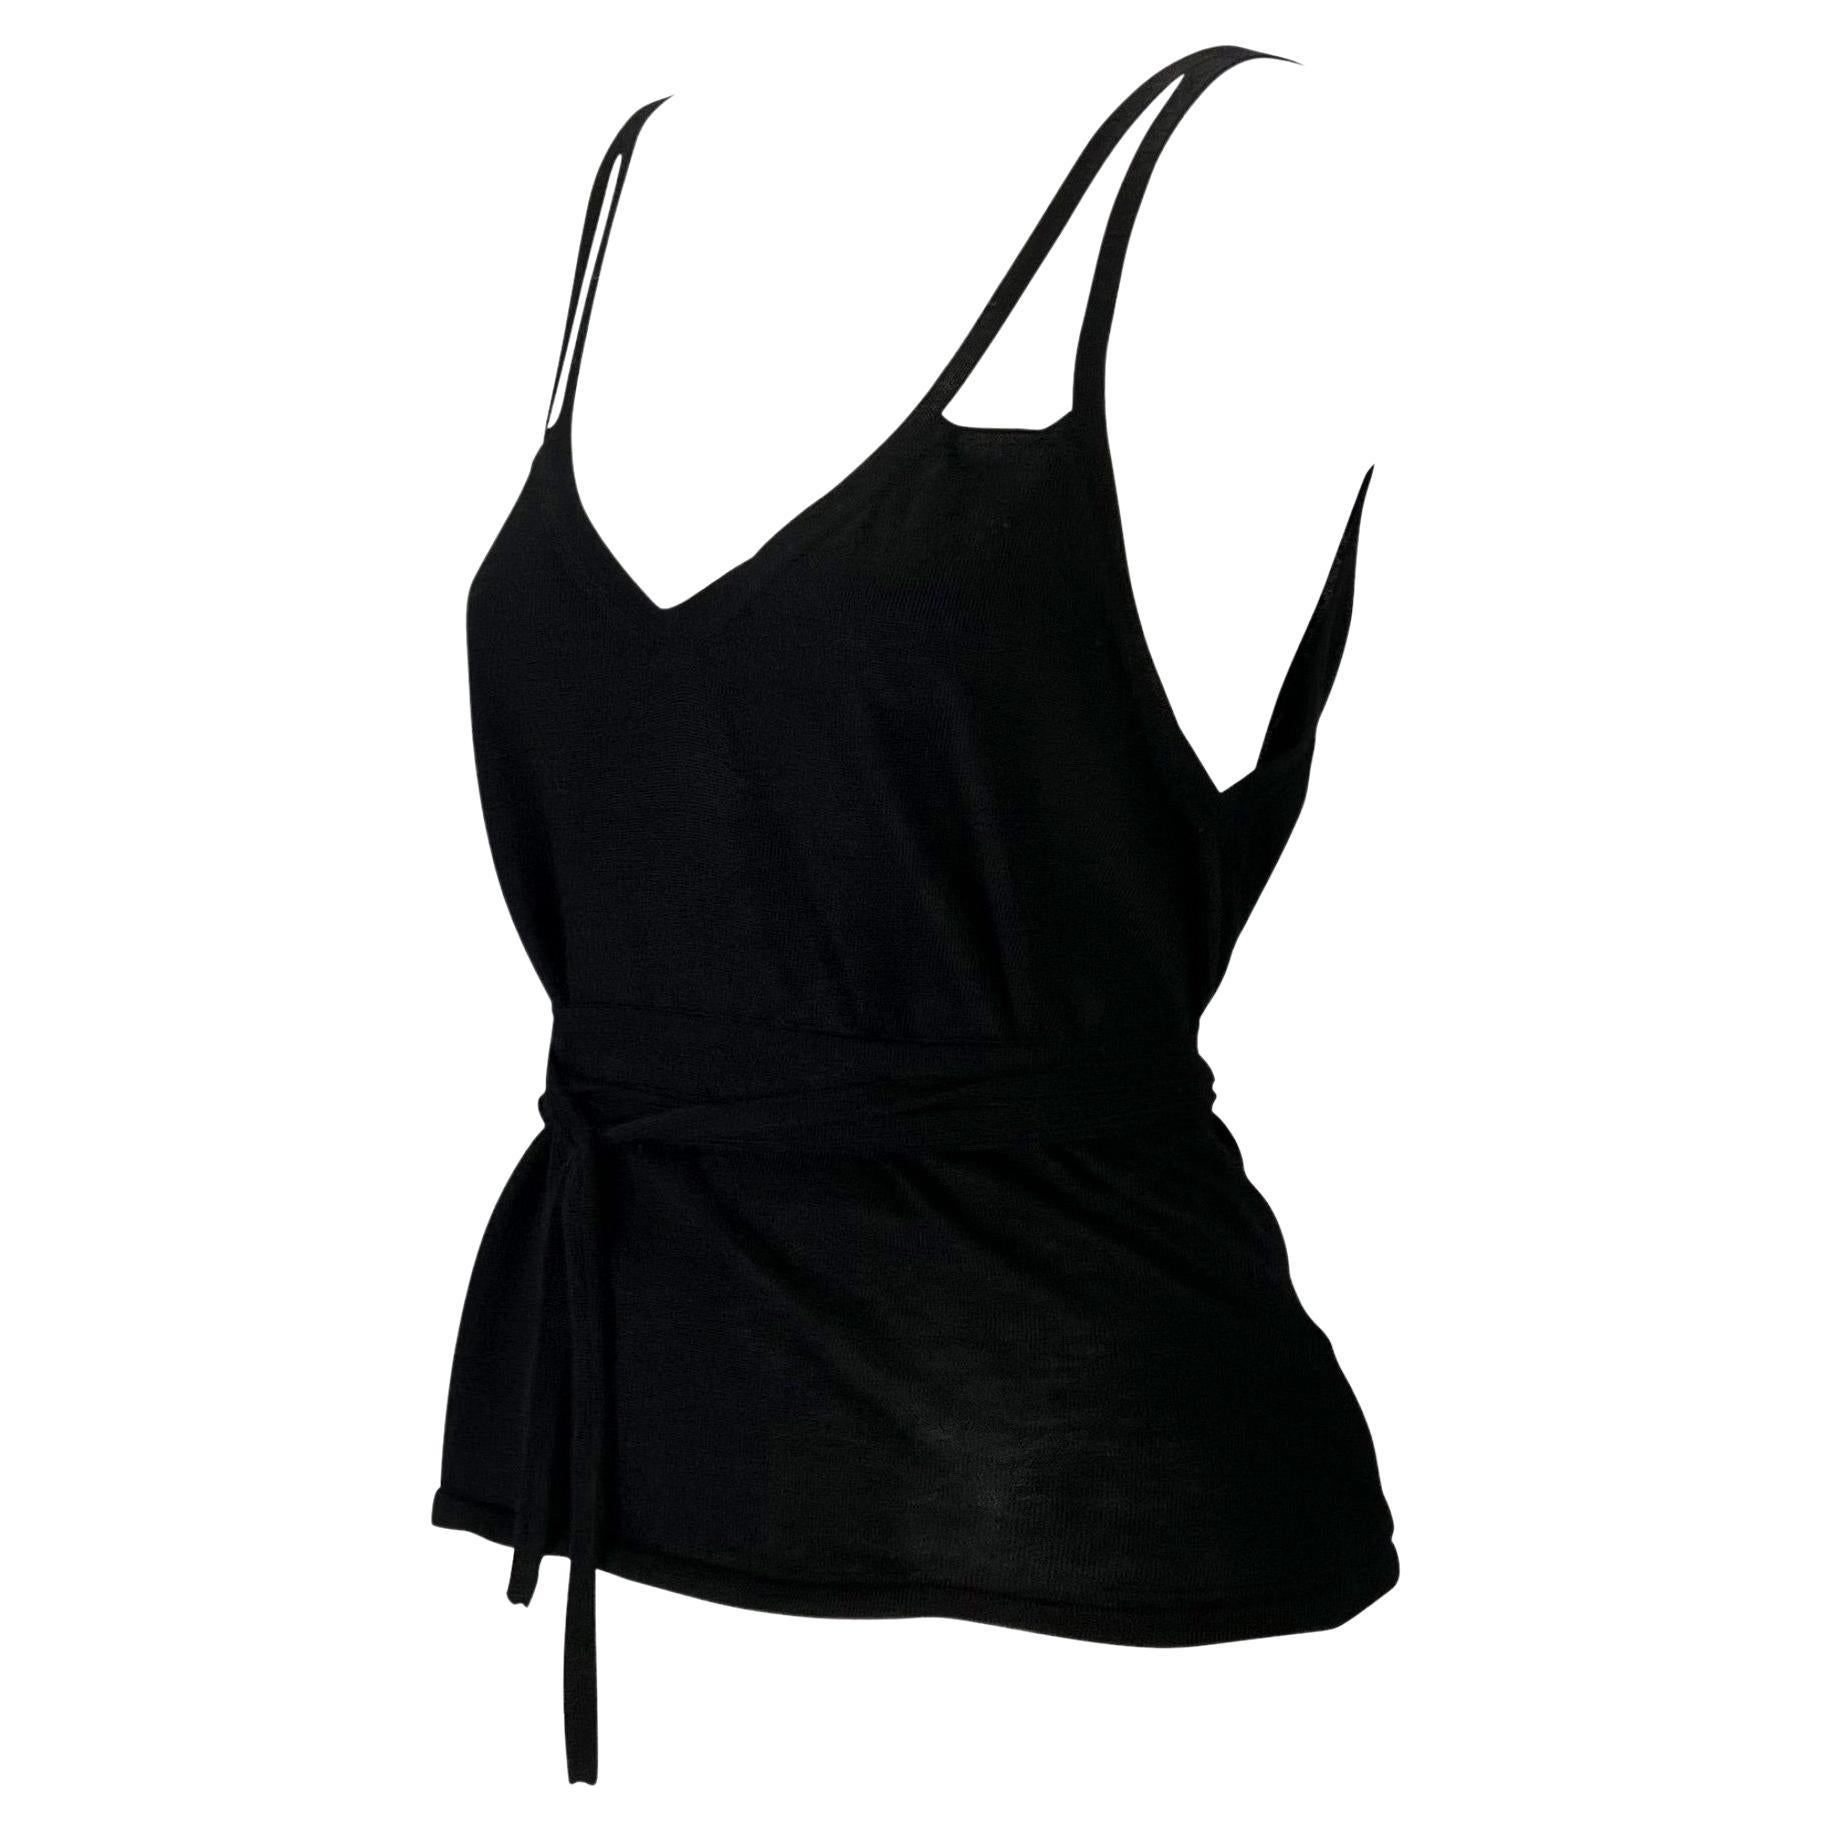 Presenting a black cashmere Gucci wrap-around tank top, designed by Tom Ford. From the late 1990s, this oh-so-soft tank top wraps around the body and features a v-shaped cut at the back, multiple straps, and a v-neckline. This never worn top is made